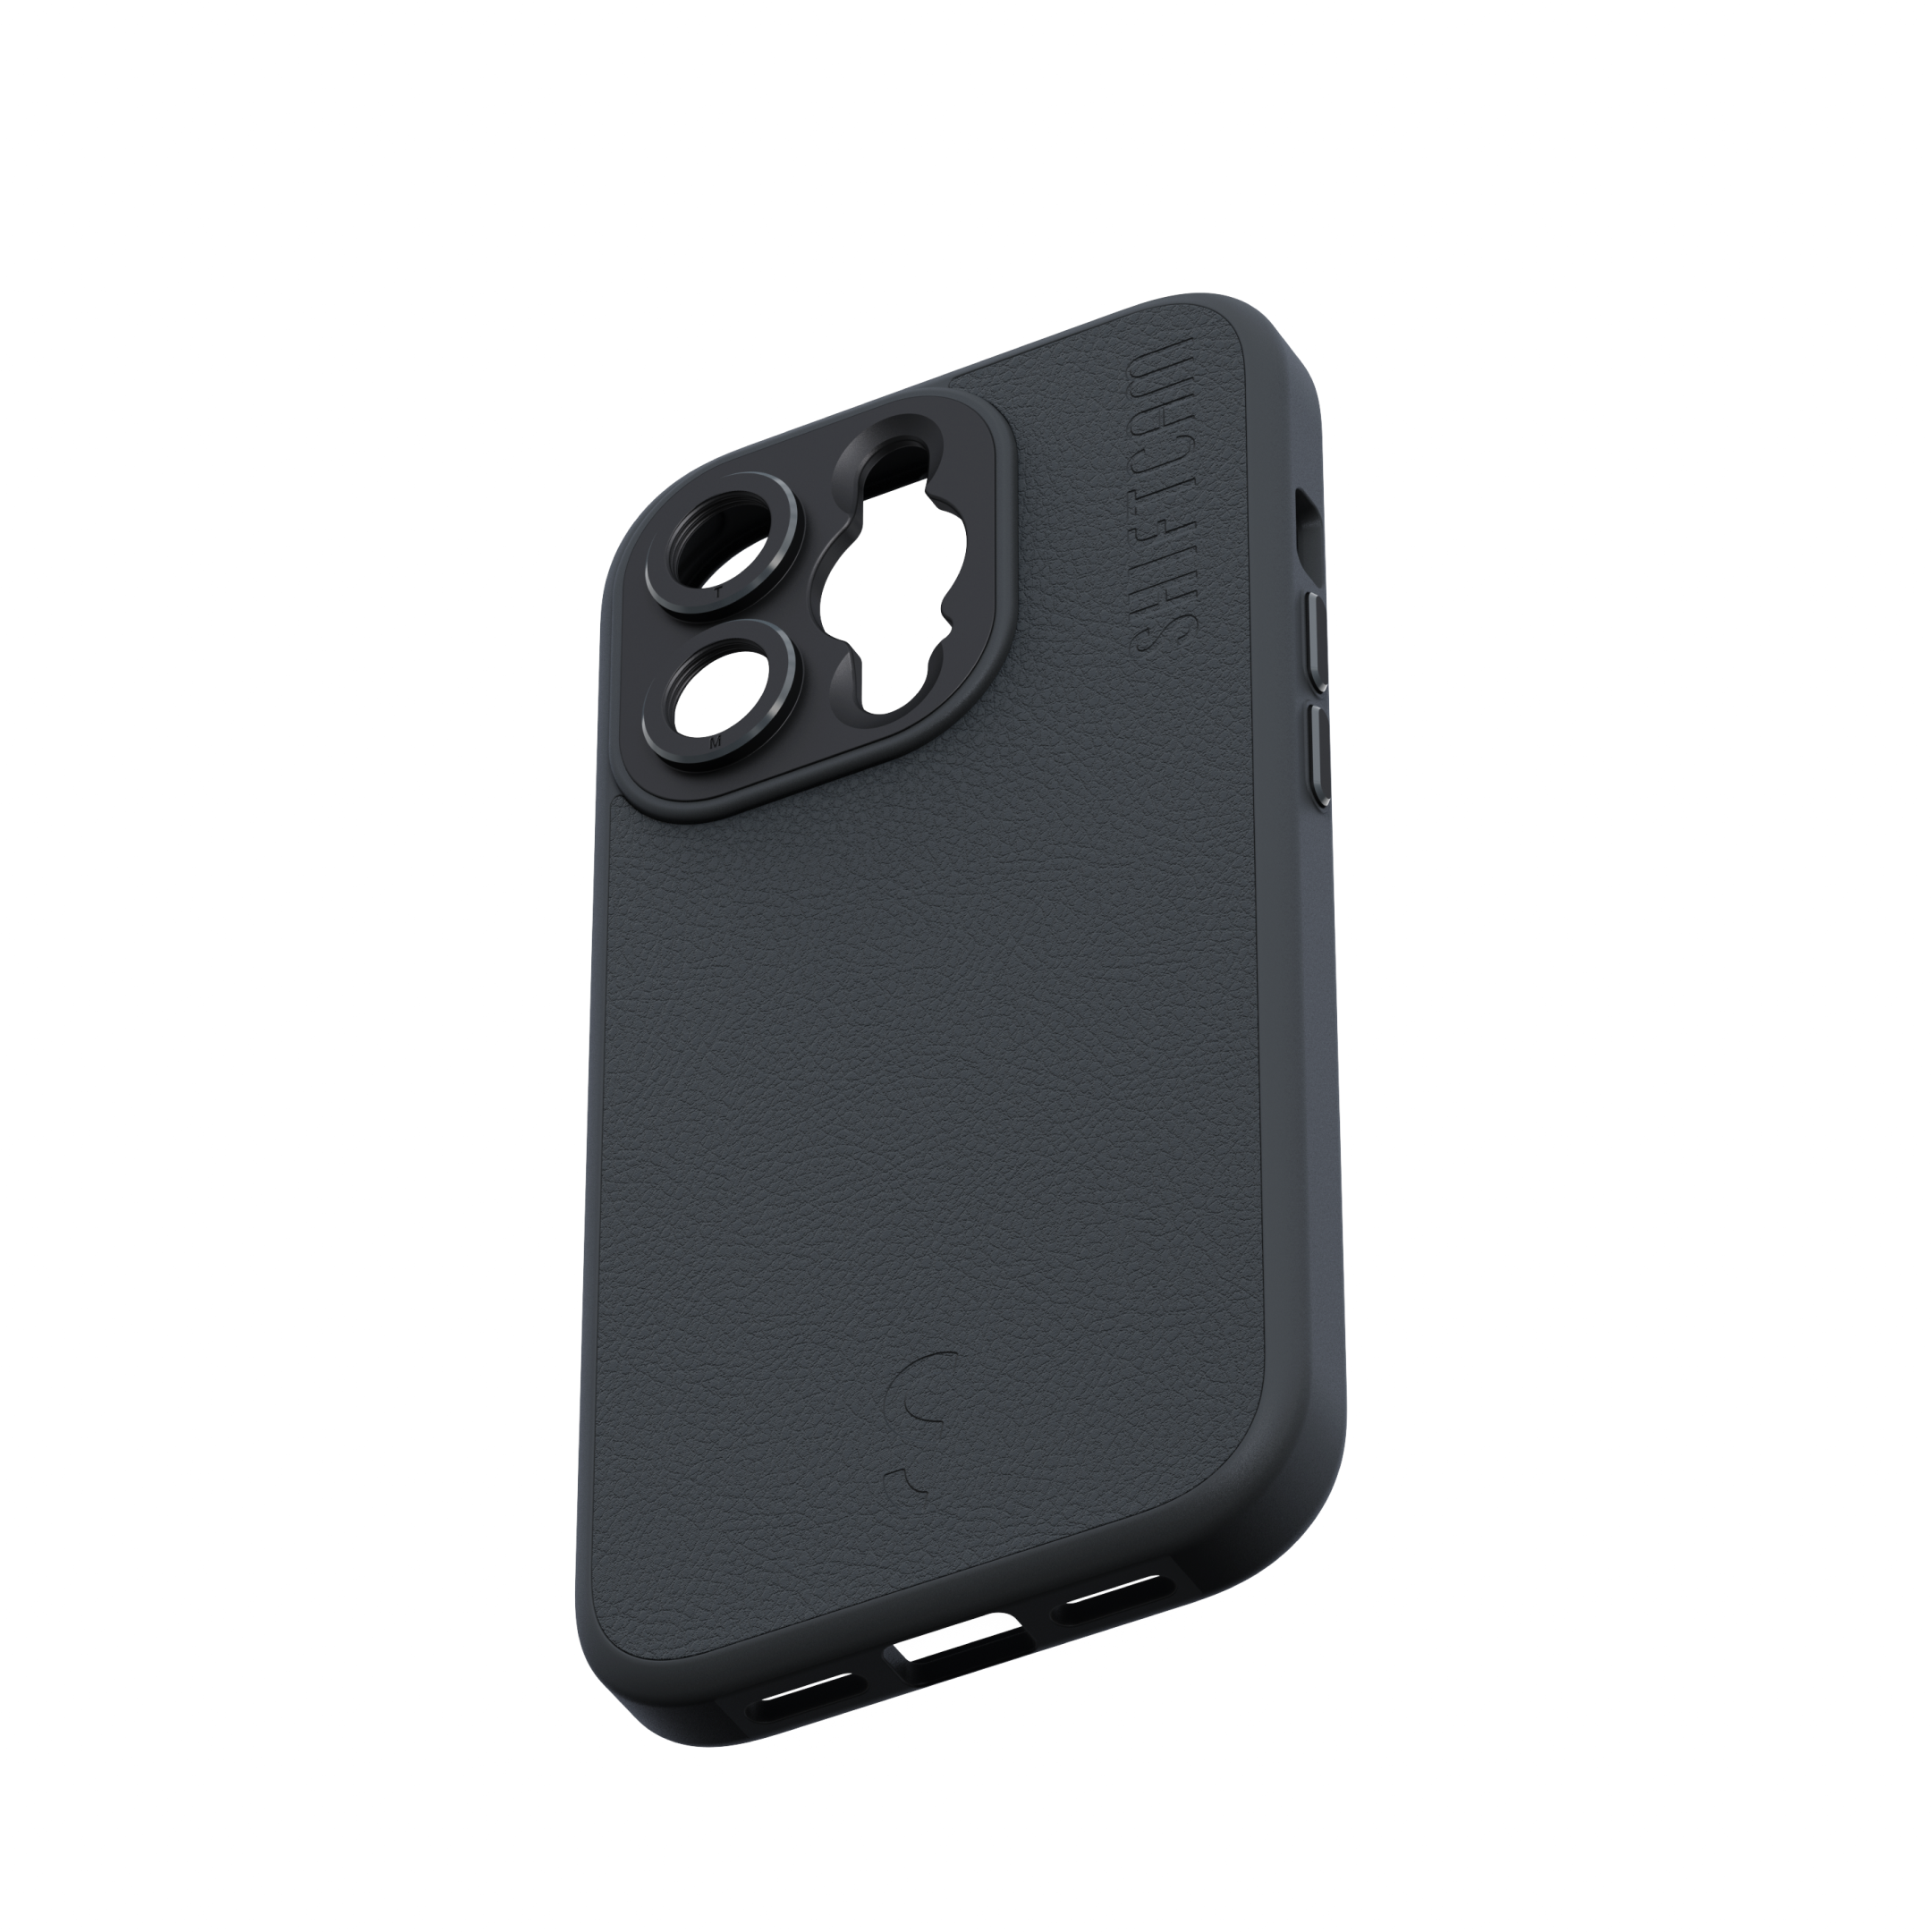 Apple, Pro, Backcover, Case SHIFTCAM 14 Objektivhalterung, LensUltra mit Charcoal iPhone